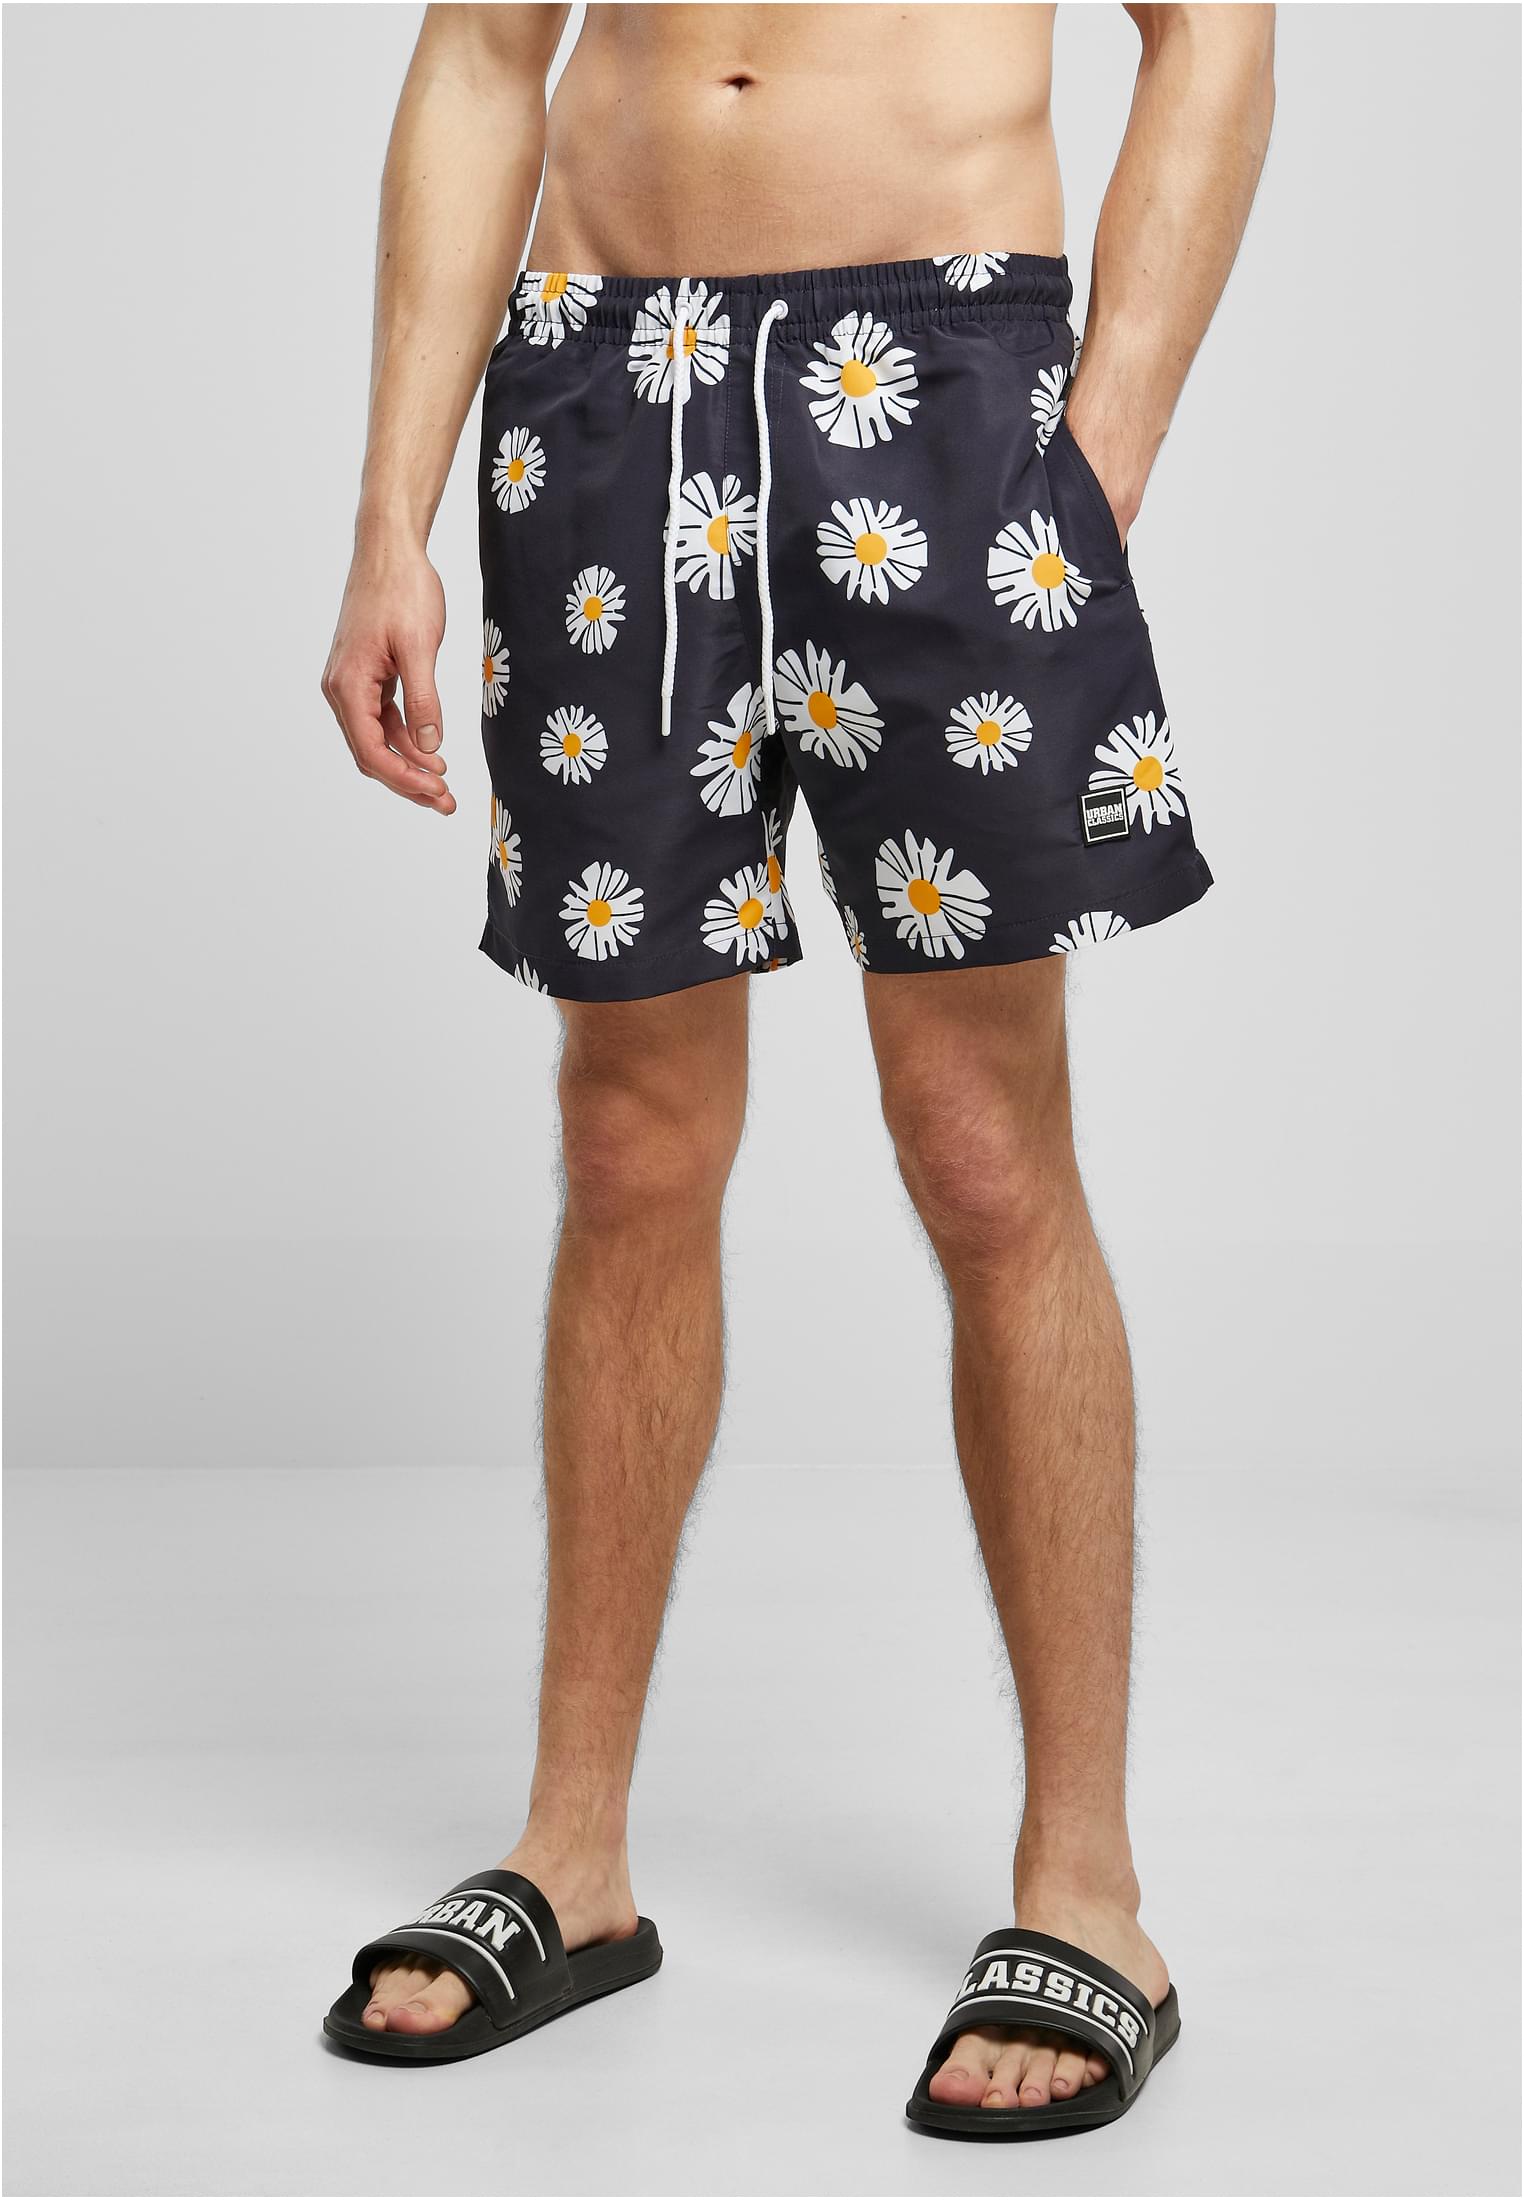 Swimsuit shorts with easternavydaisy pattern